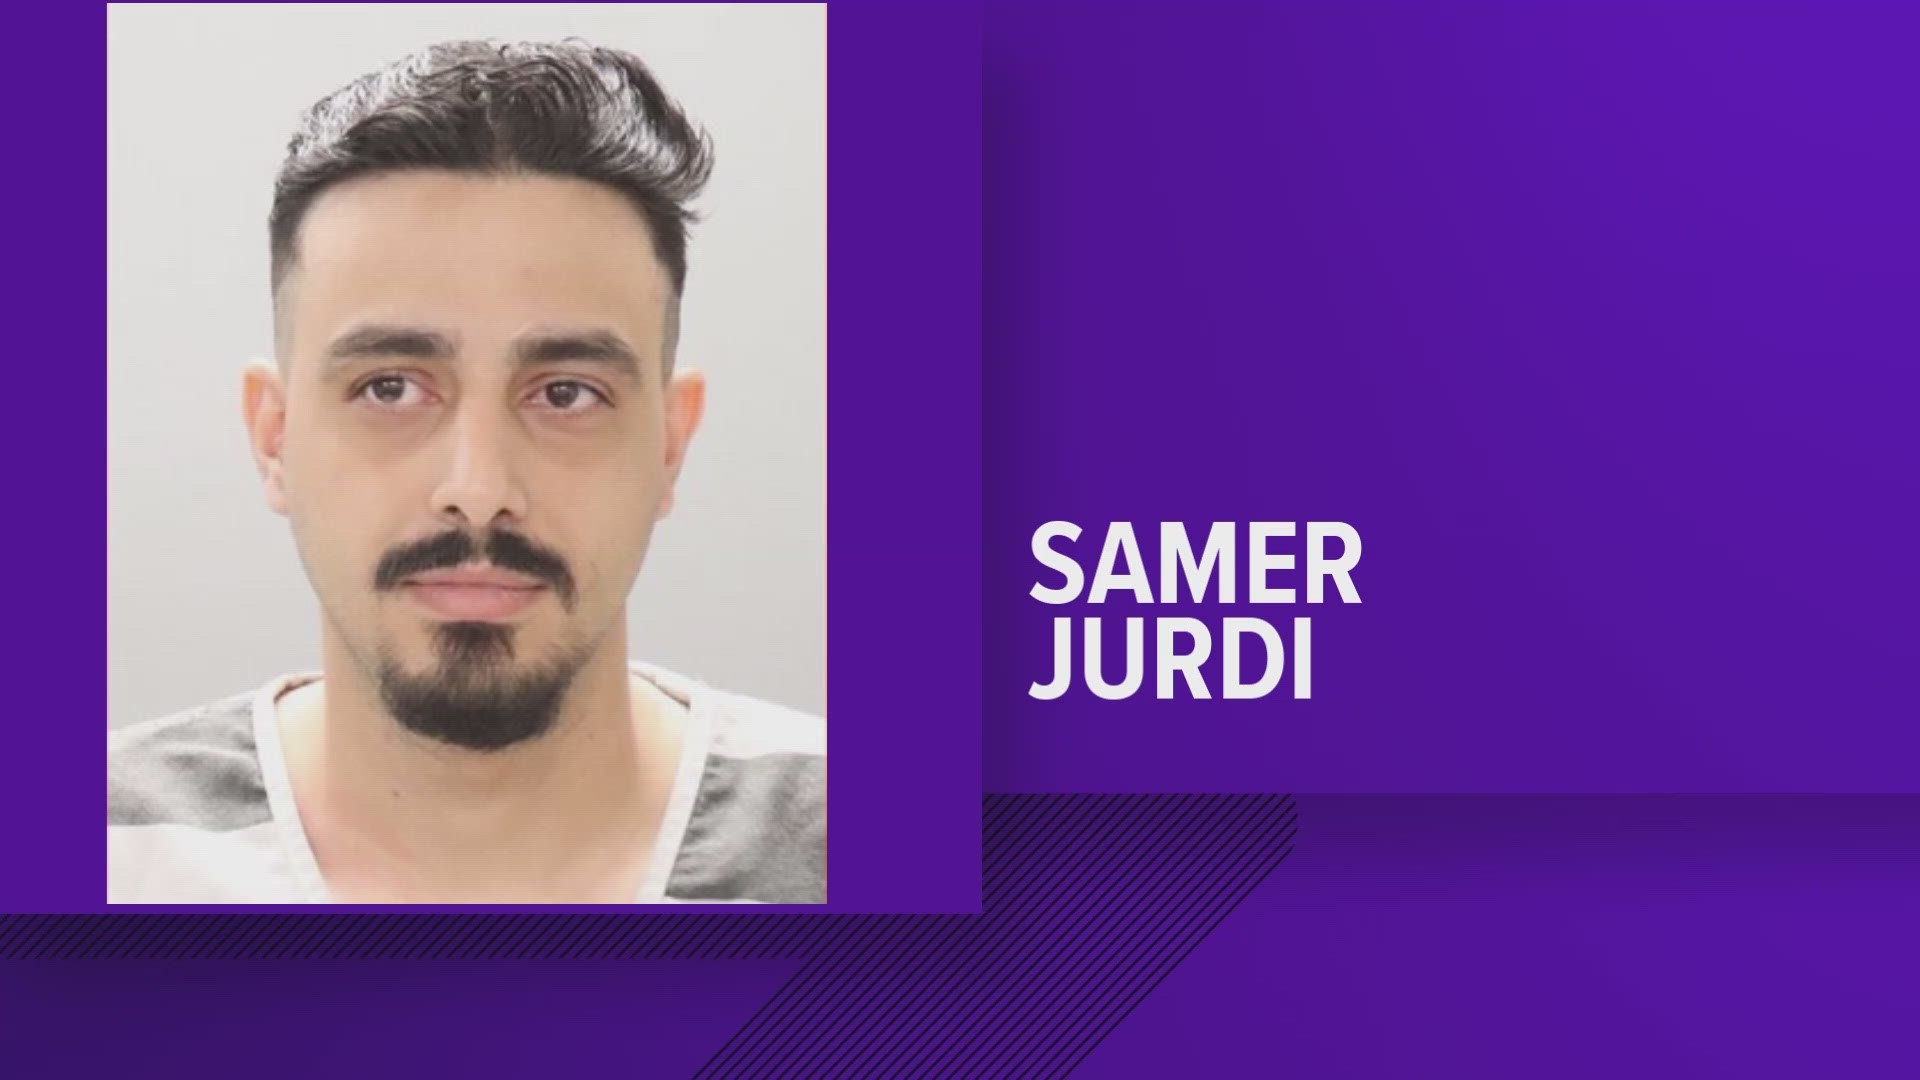 Samer Jurdi, 28, was taken into custody early Thursday morning, according to the Knoxville Police Department.